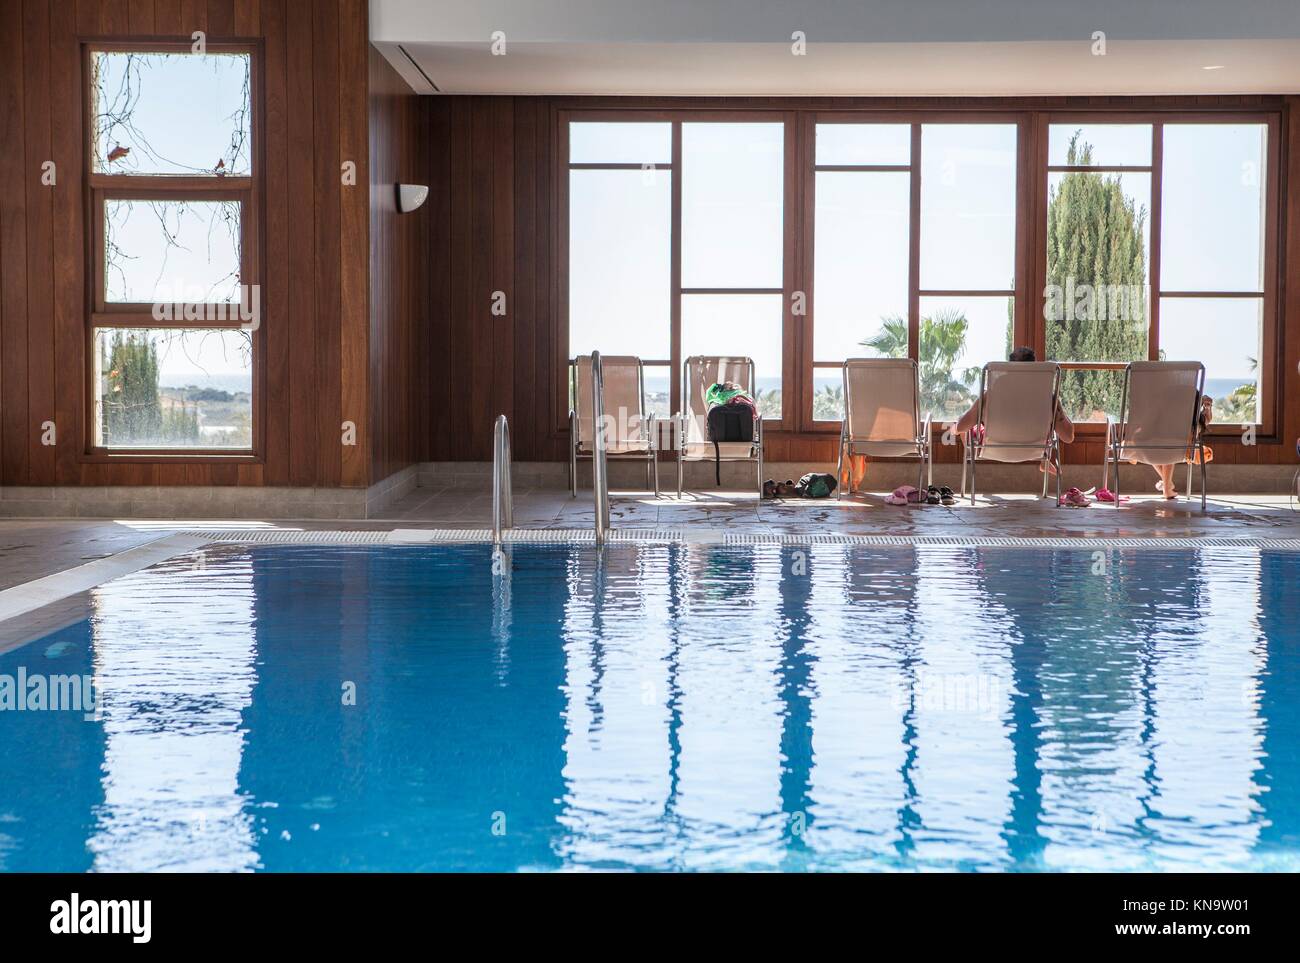 Spa luxury swimming pool with wooden structure. This facilities are part of a hotel. Stock Photo